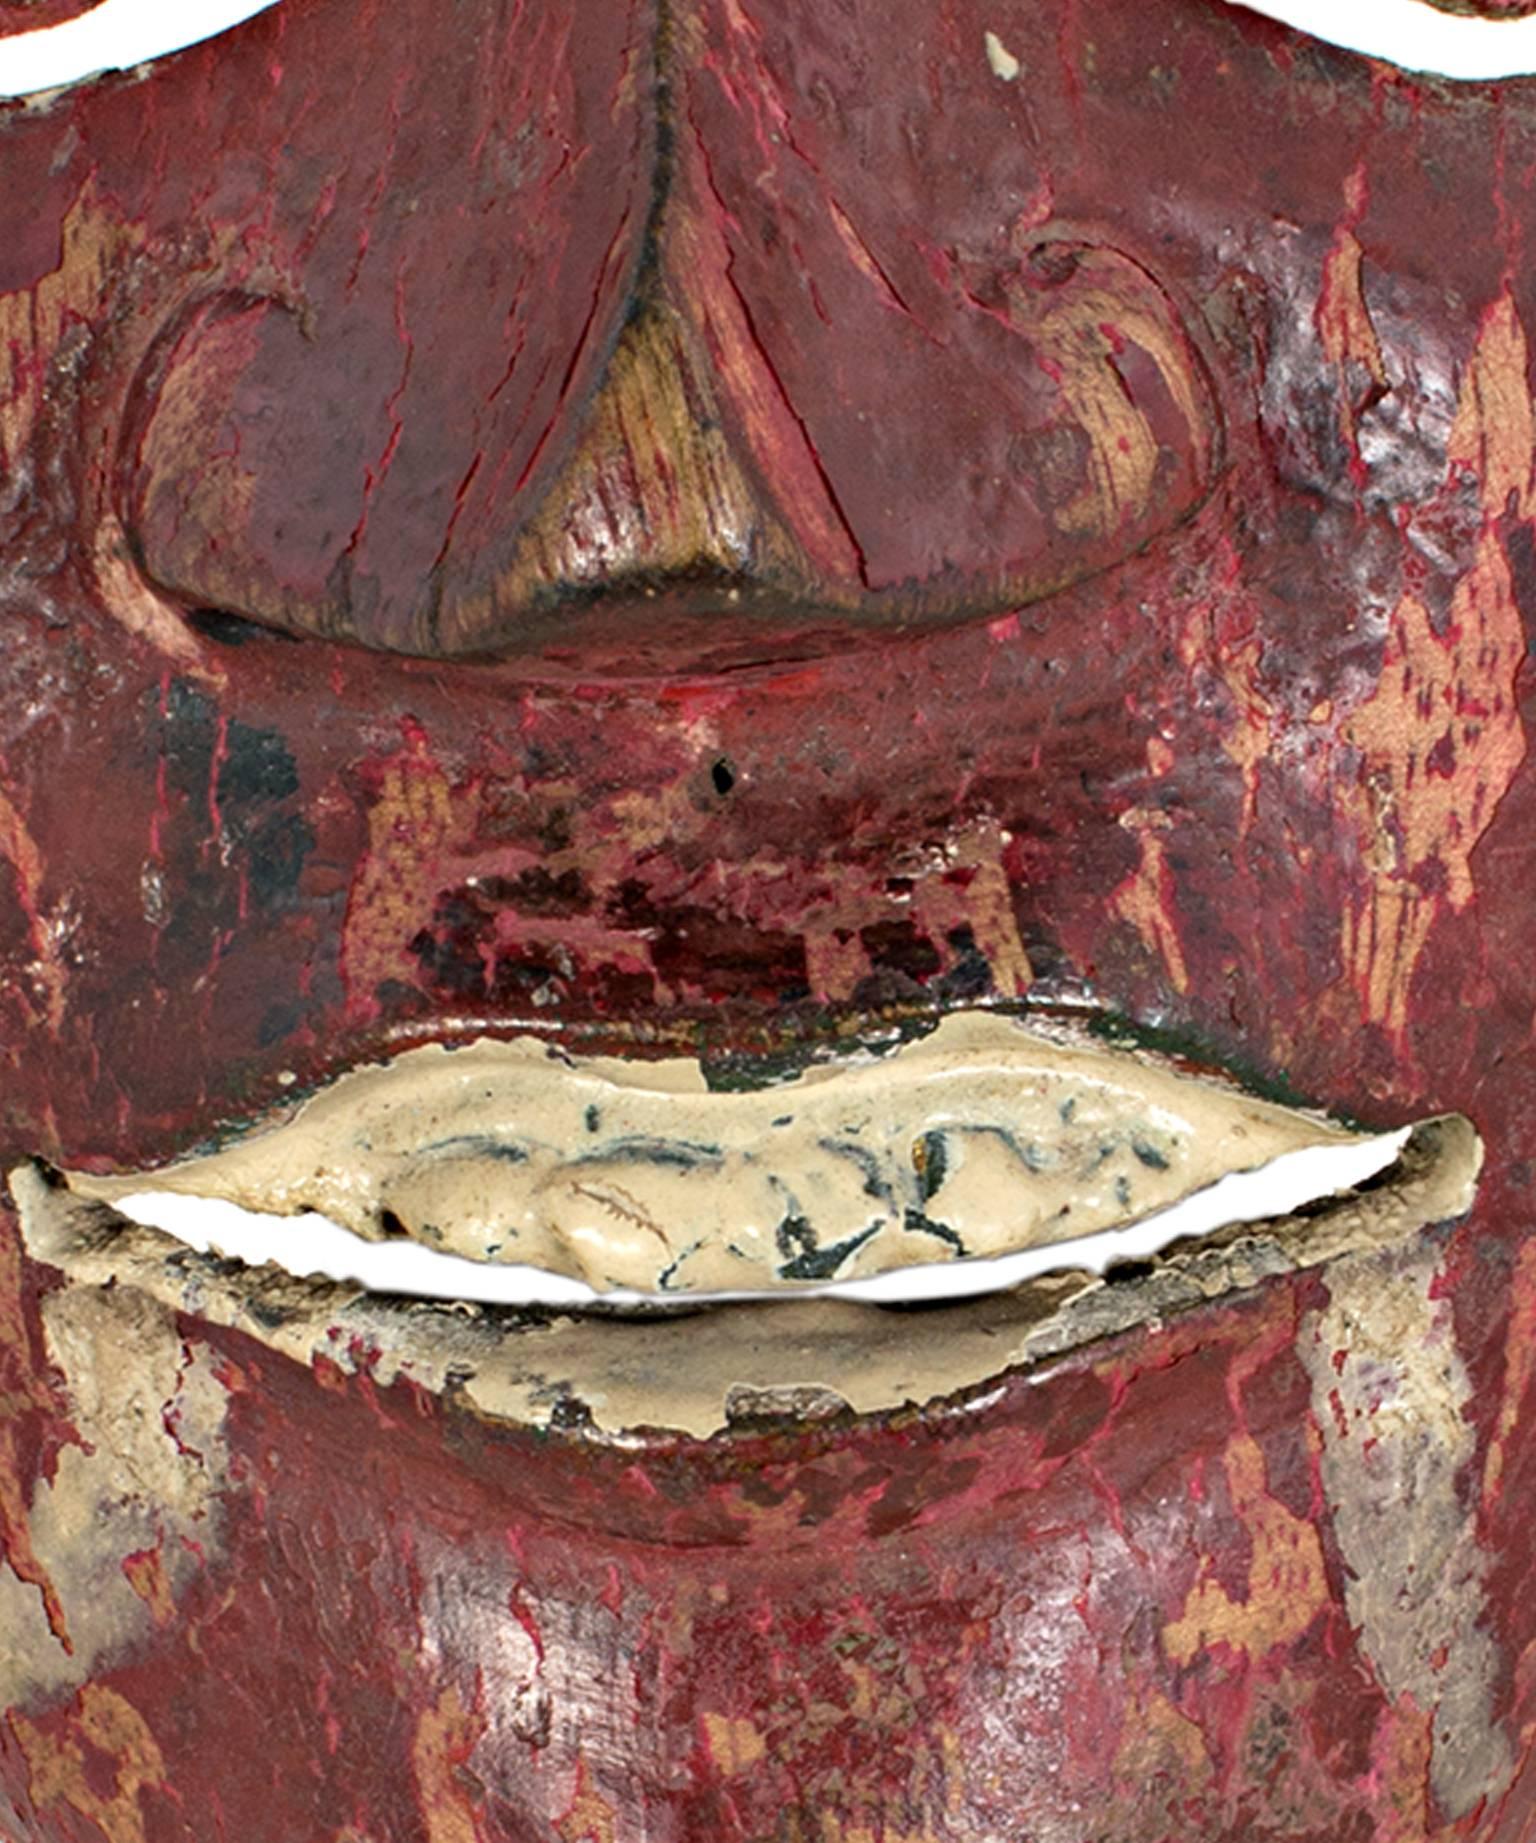 This mask, created by an unknown Indonesian artist, features round eyes, painted fangs, and a blood red face. It is approximately 7 1/4